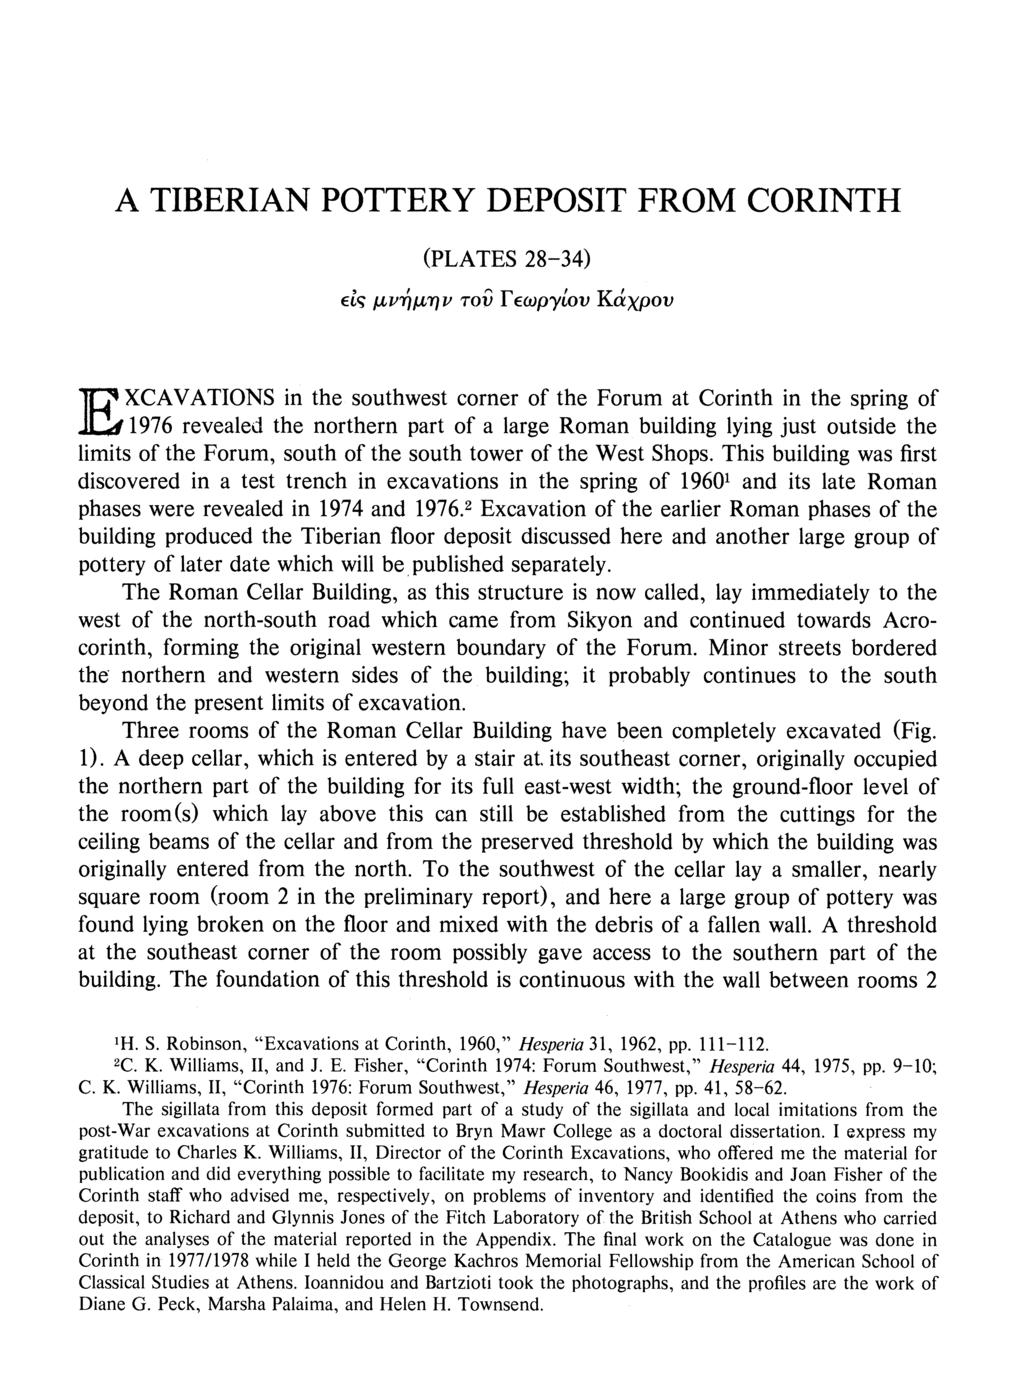 E A TIBERIAN POTTERY DEPOSIT FROM CORINTH (PLATES 28-34) Etl IUrrjqtijv ToV FEwpytov KaXpov XCAVATIONS in the southwest corner of the Forum at Corinth in the spring of 1976 revealed the northern part